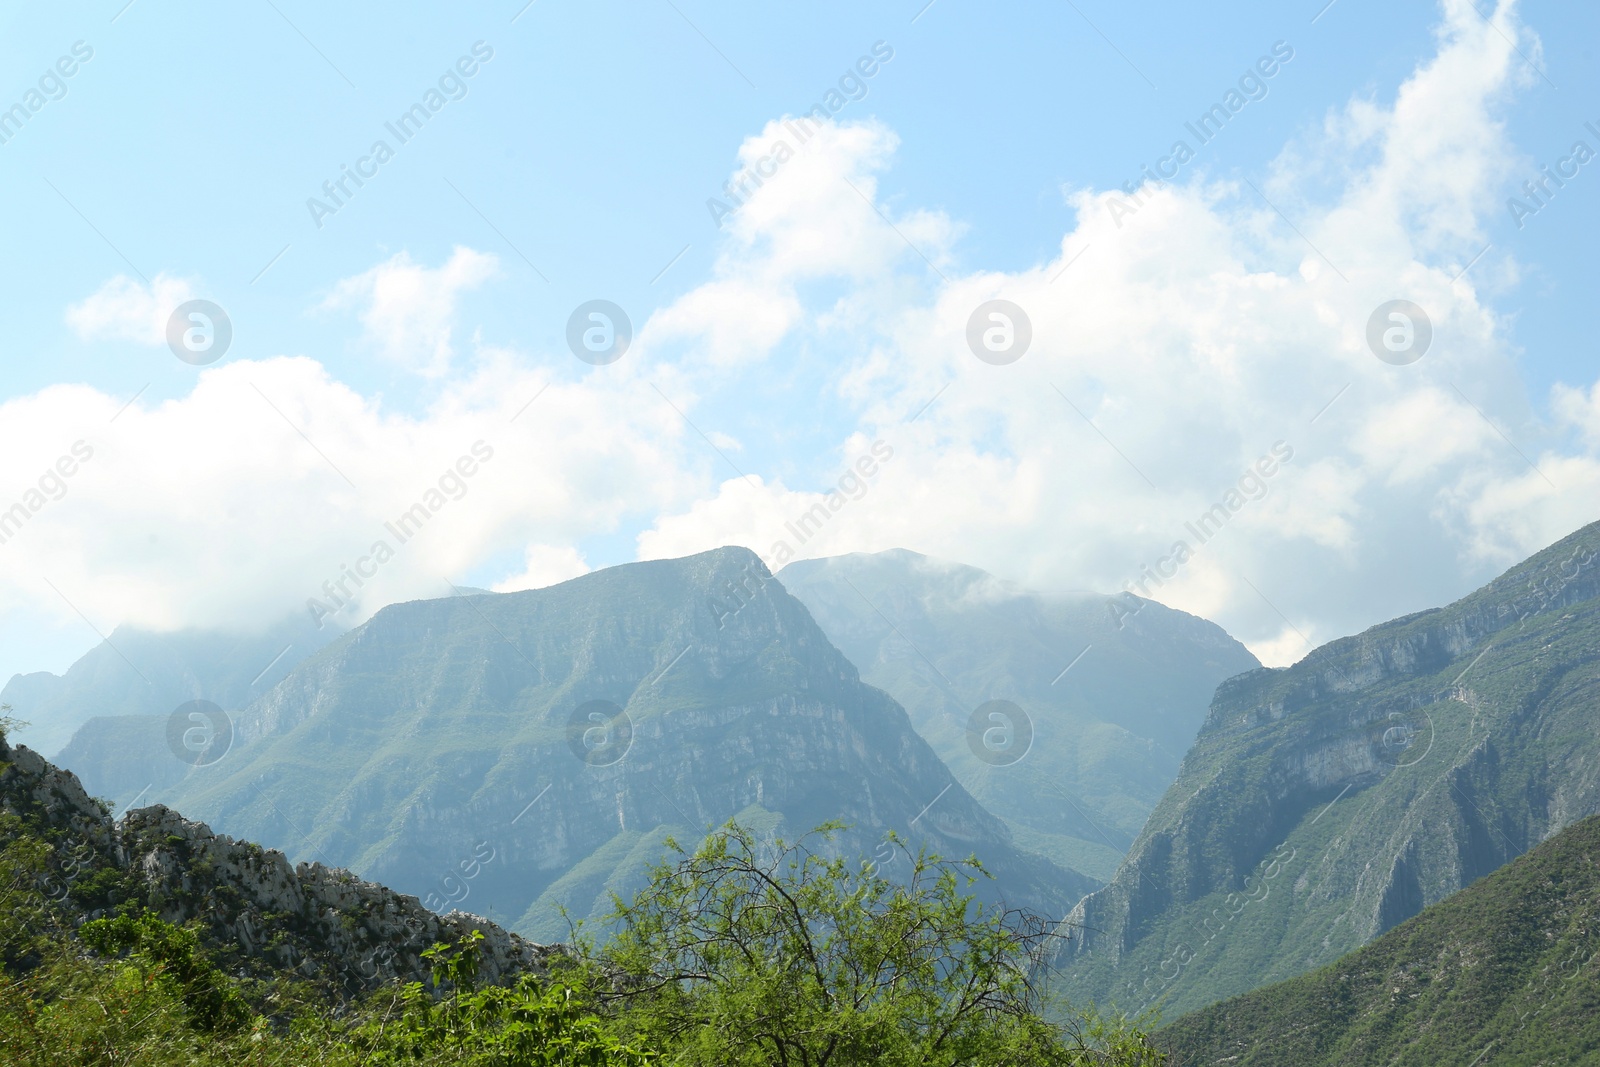 Photo of Picturesque view of beautiful mountain and trees under cloudy sky